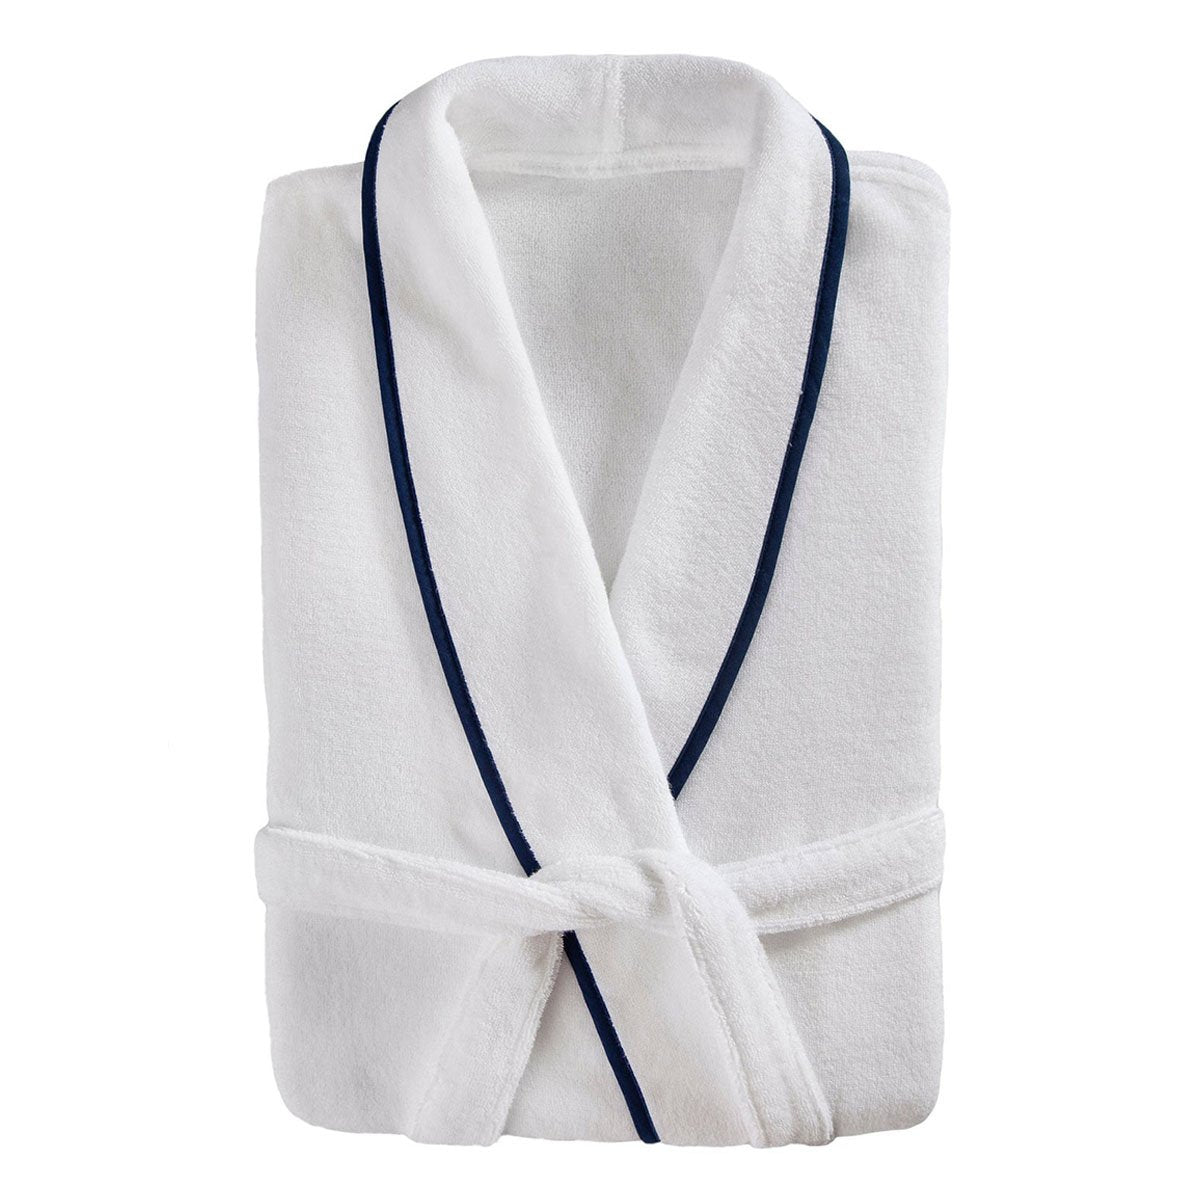 Turkish Plush Robe with Piping, 100% Cotton, Cotton Gift for Couples, Personalized and Monogrammed Robe | Made in Turkey, Birthday Gift - www.towel.com